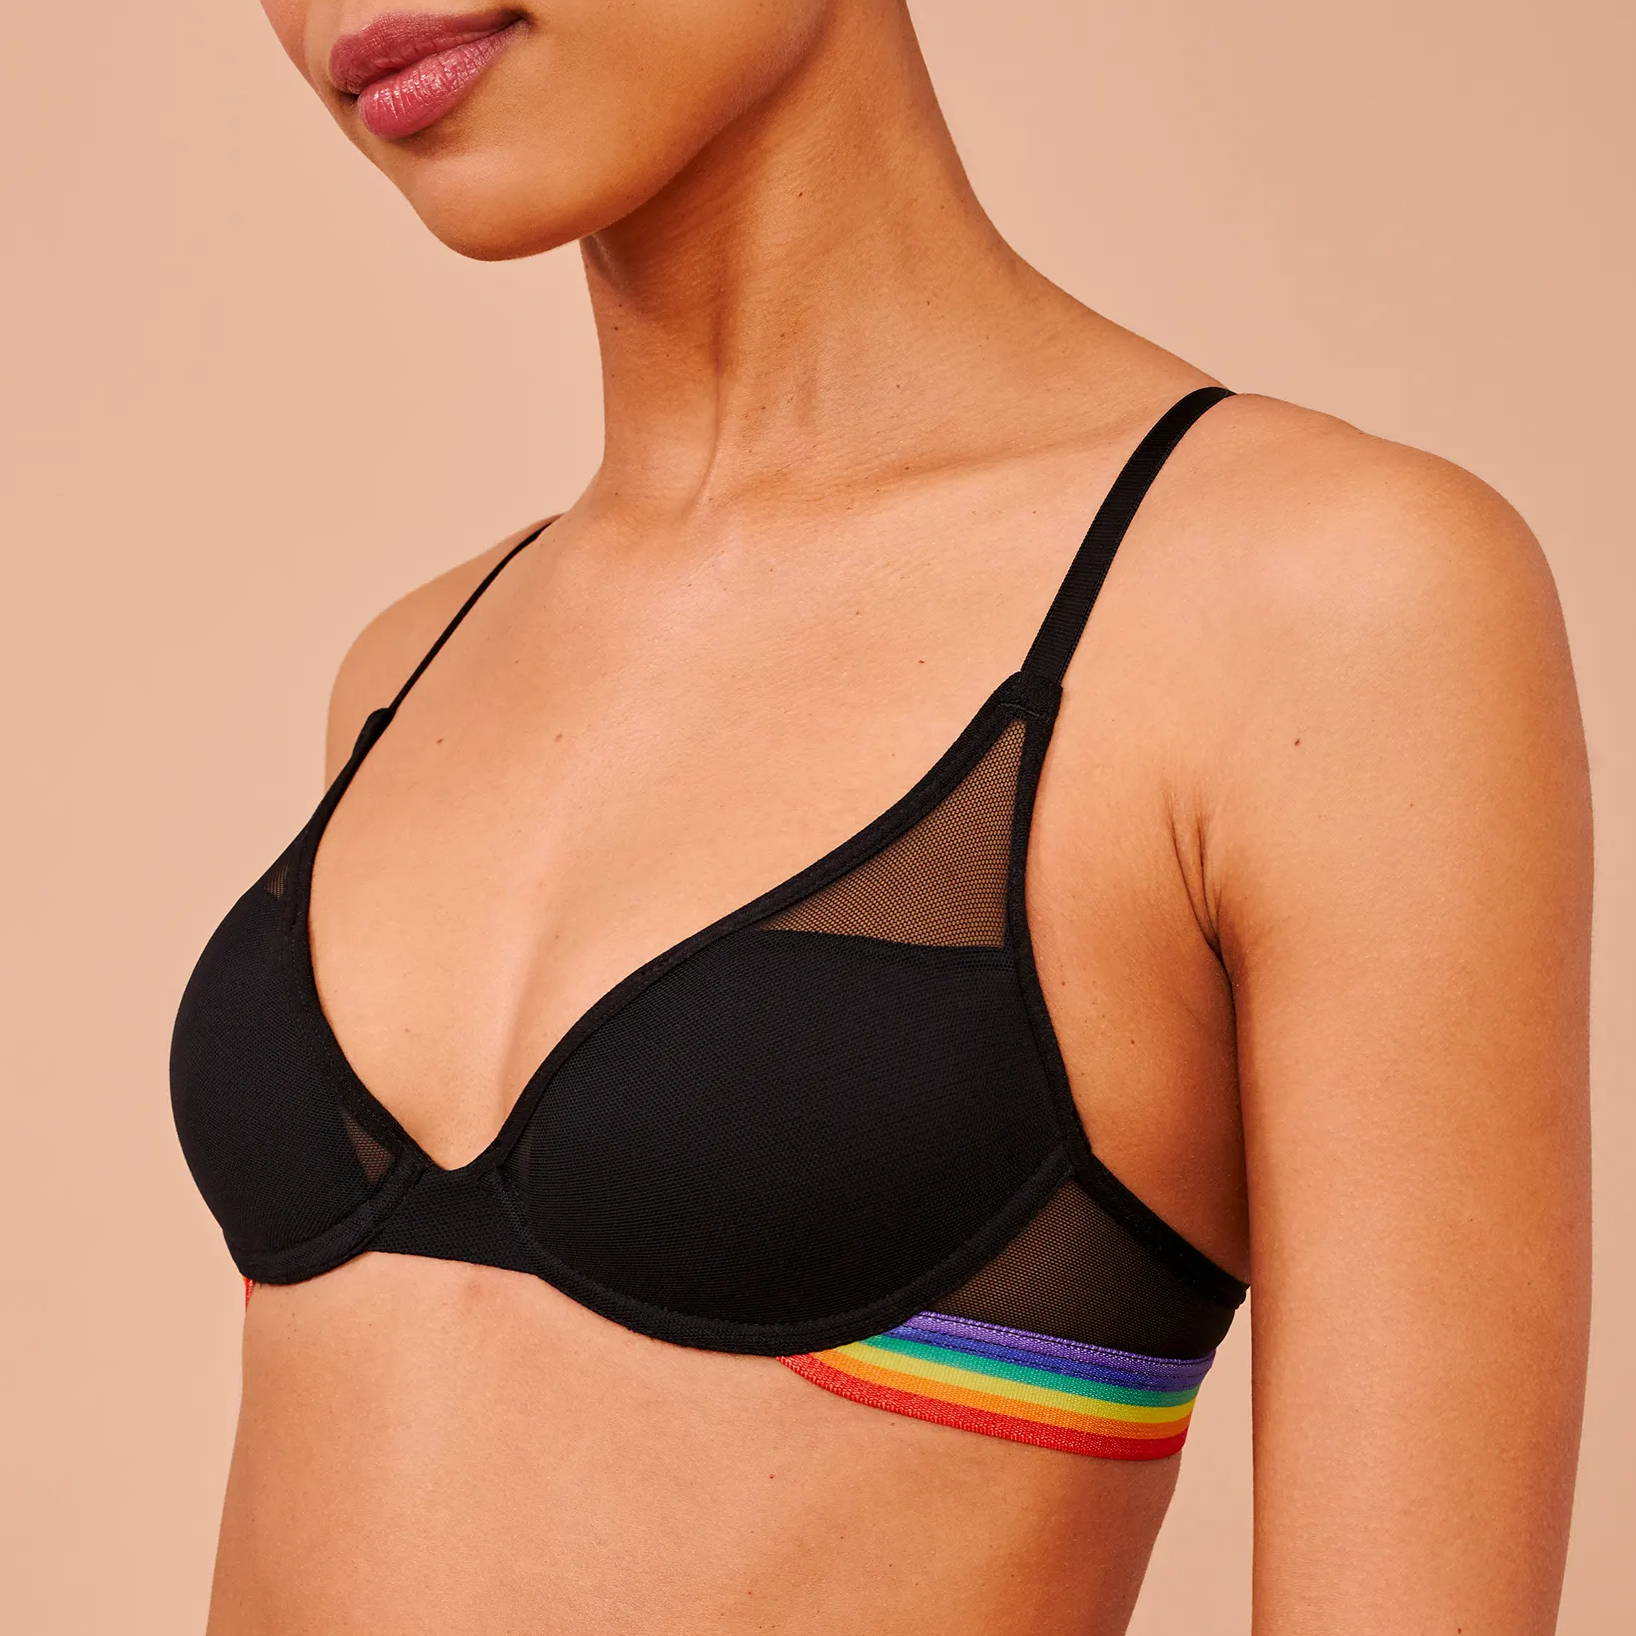 b cup size the best bras for small busts in rainbow pride edition